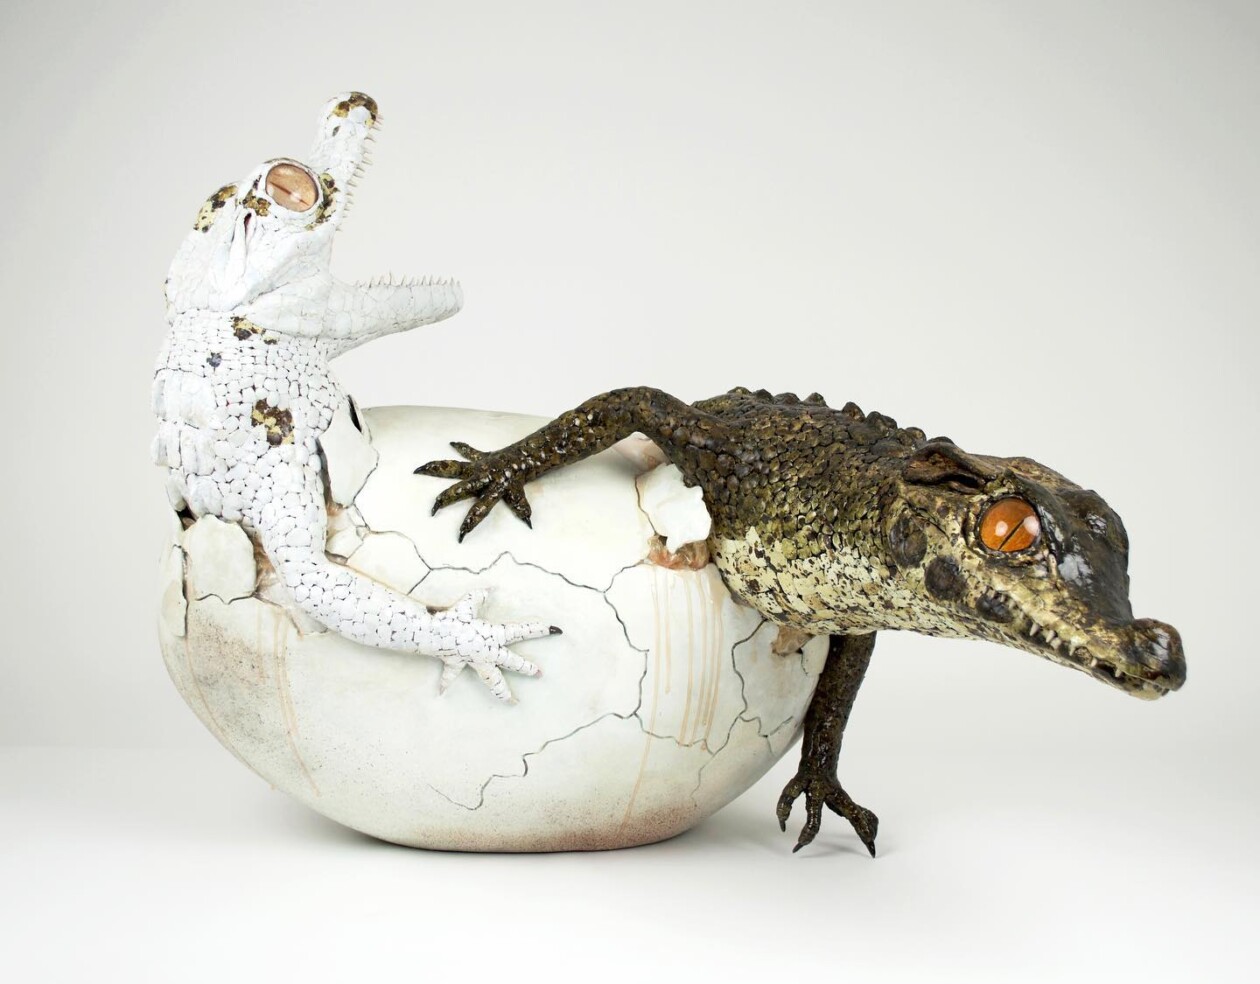 Fantastic Eggshell Sculptures Of Earth's Most Ancient Denizens By Sarah Lee (2)